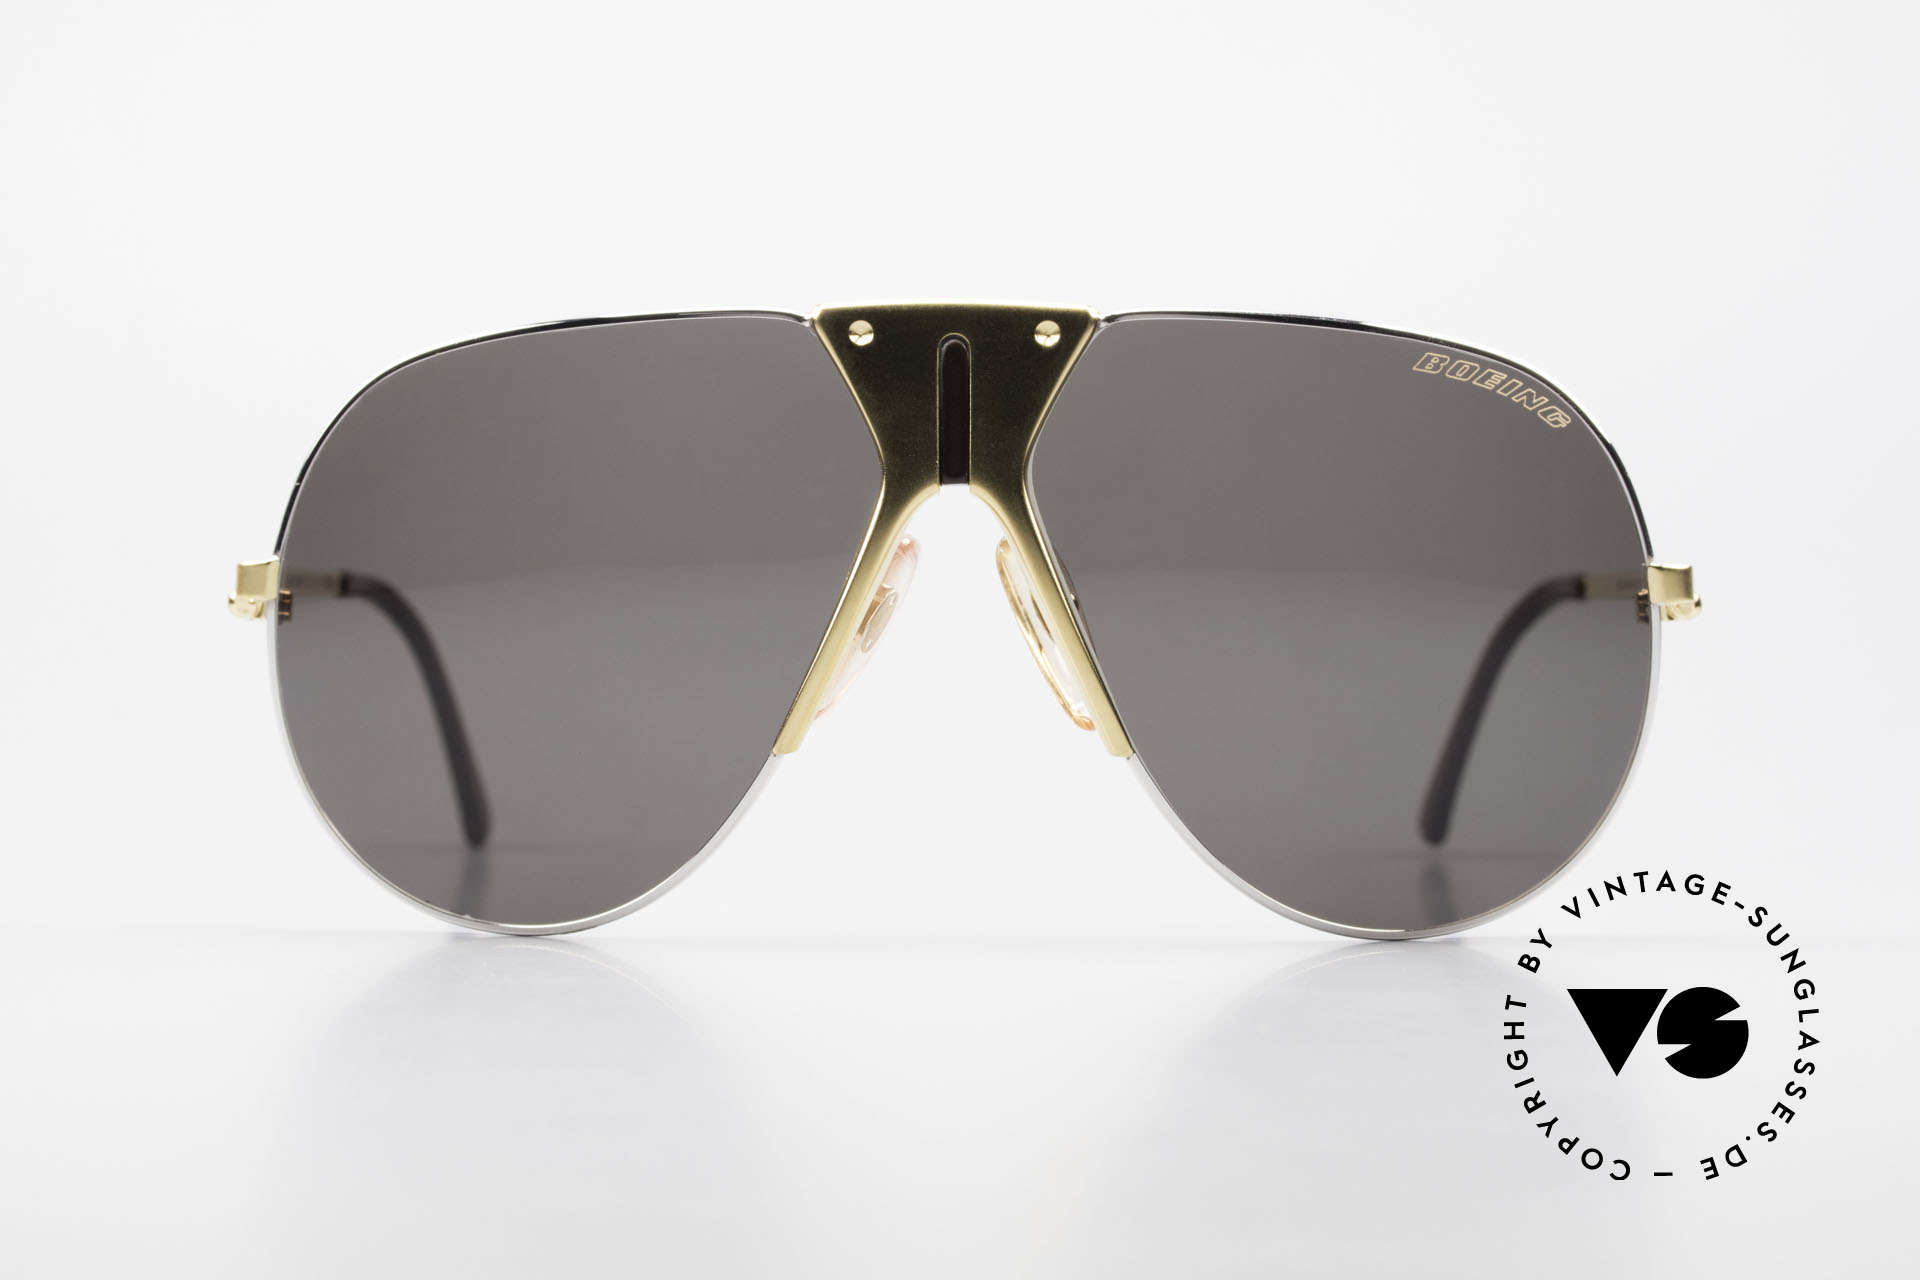 Boeing 5701 Famous 80's Pilots Shades, The BOEING Collection by Carrera from 1988/1989, Made for Men and Women